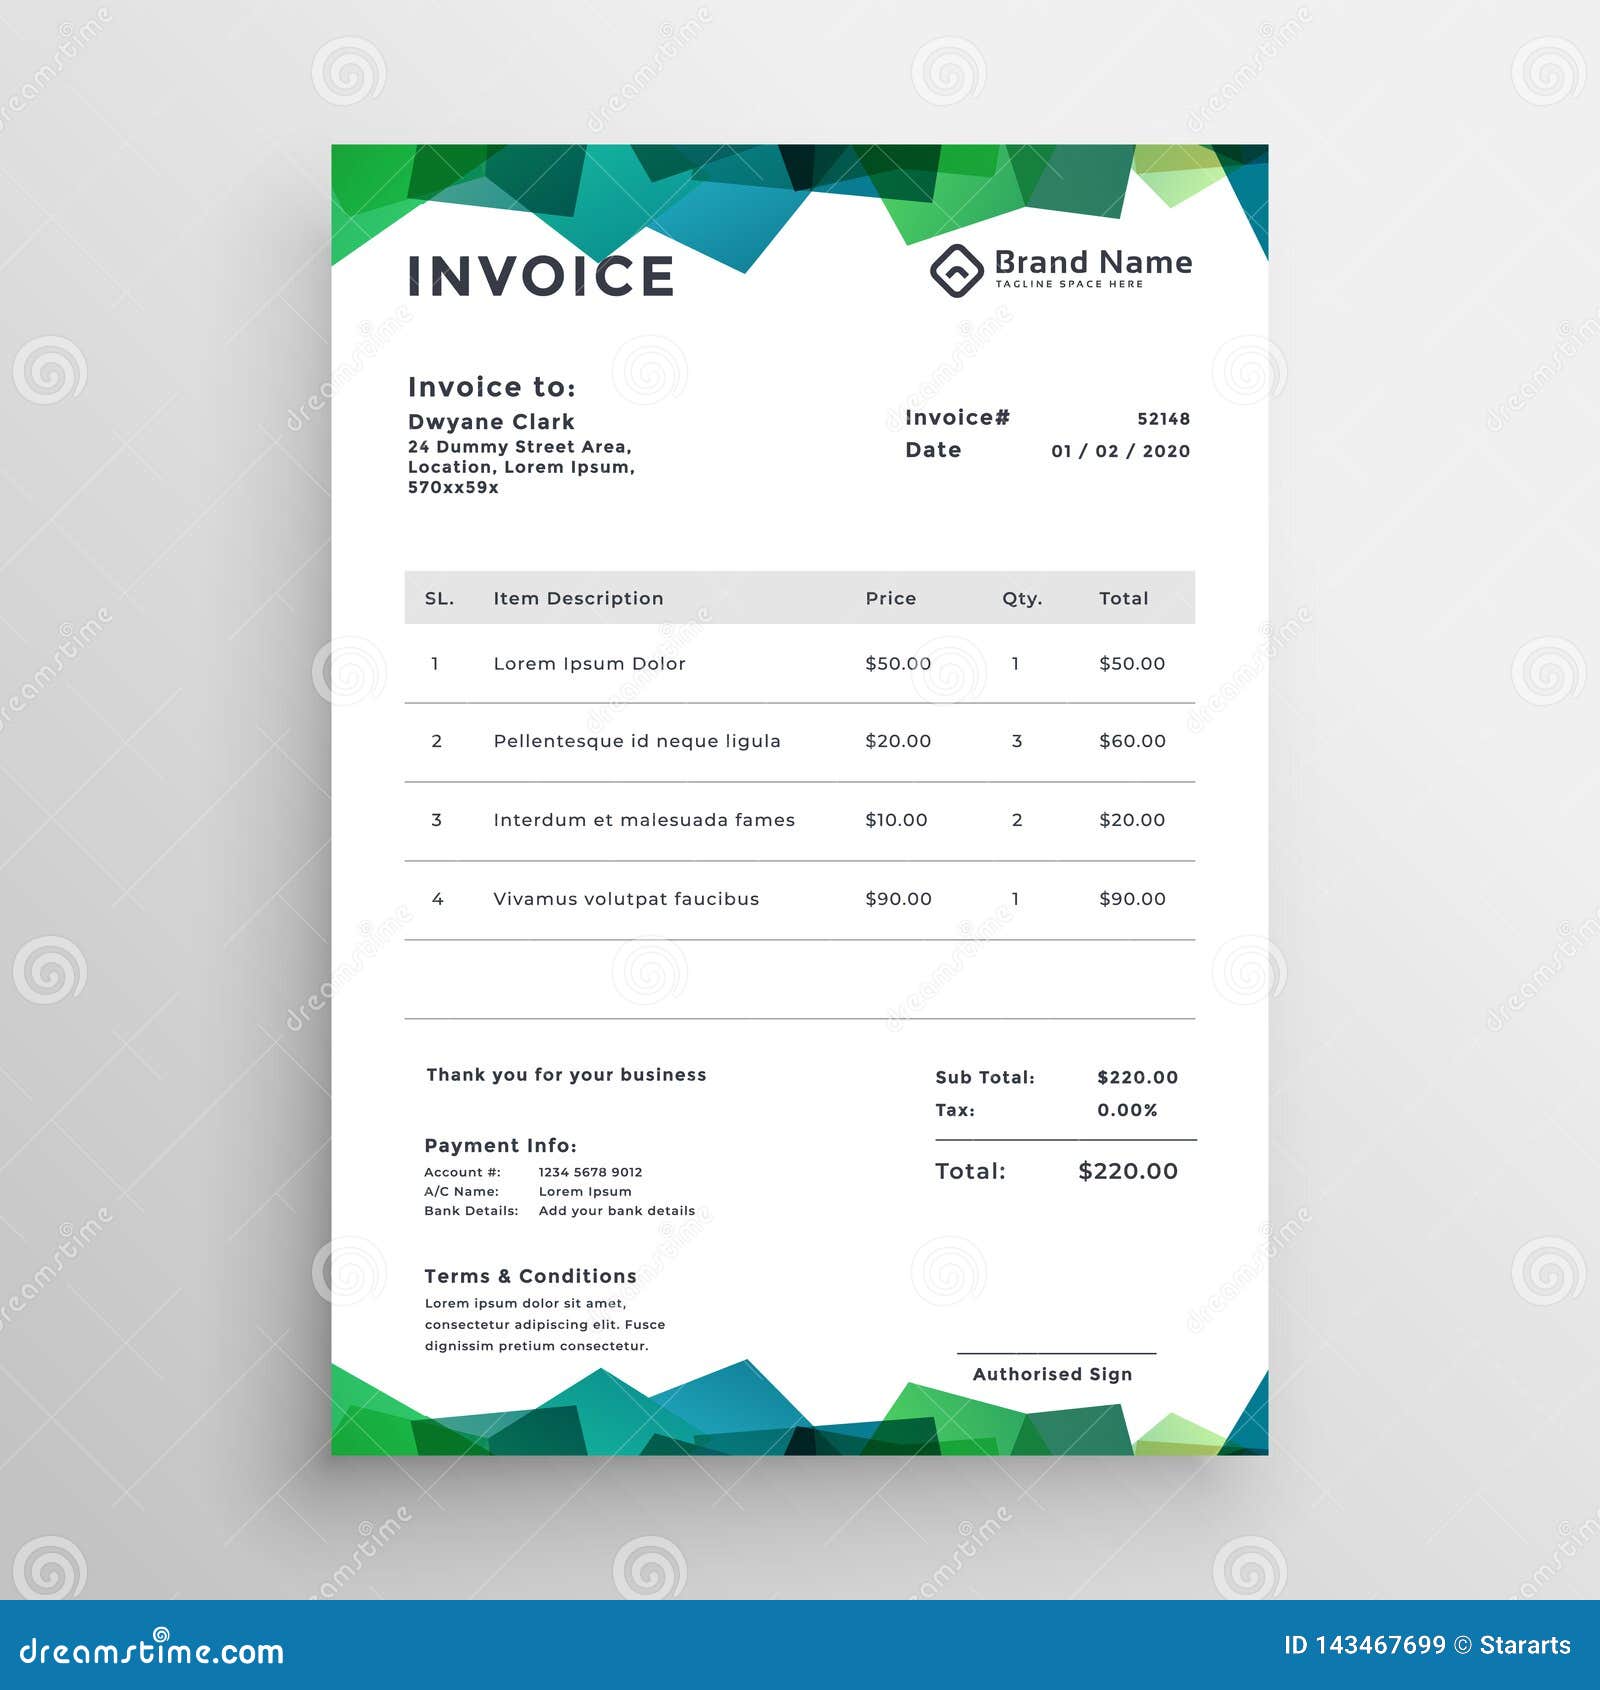 Invoice Template Design from thumbs.dreamstime.com